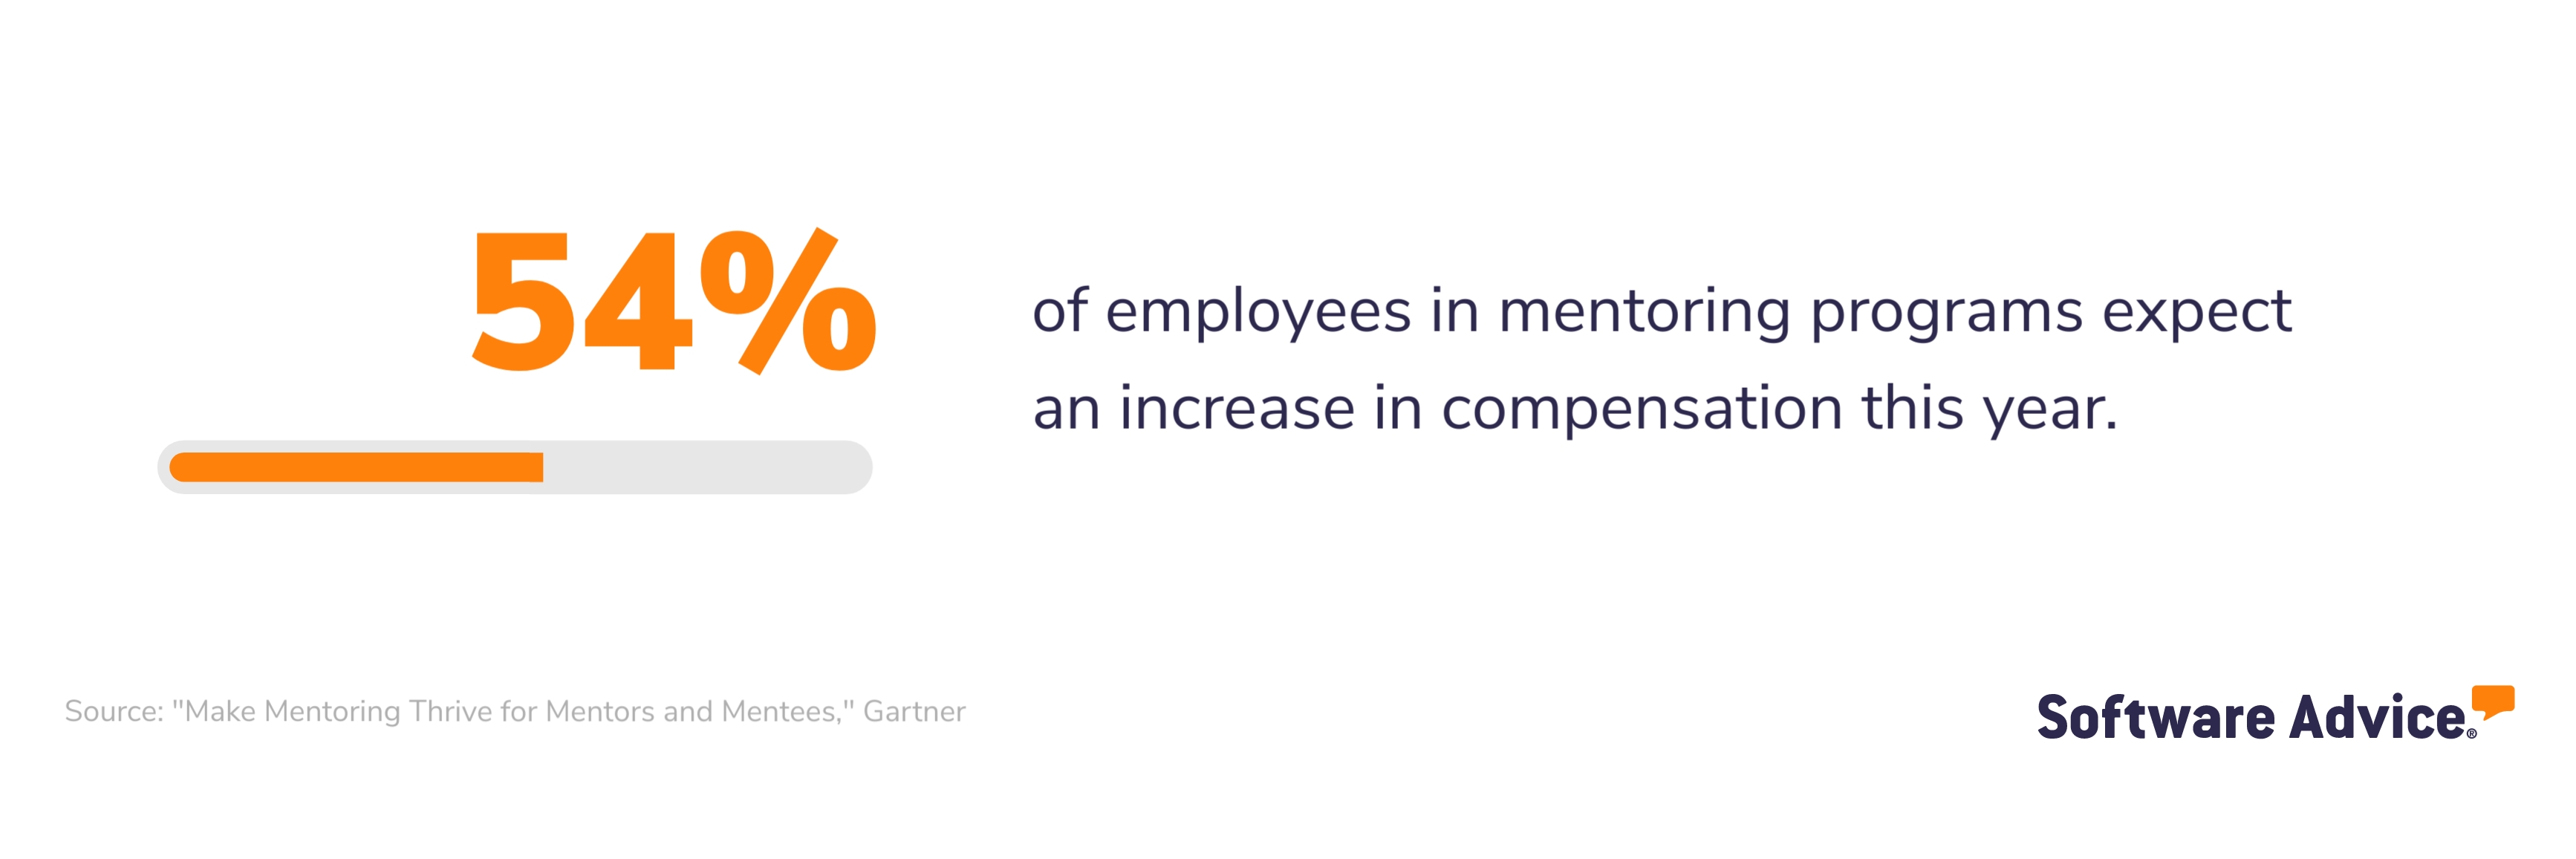 54% of employees in mentoring programs expect an increase in compensation this year.